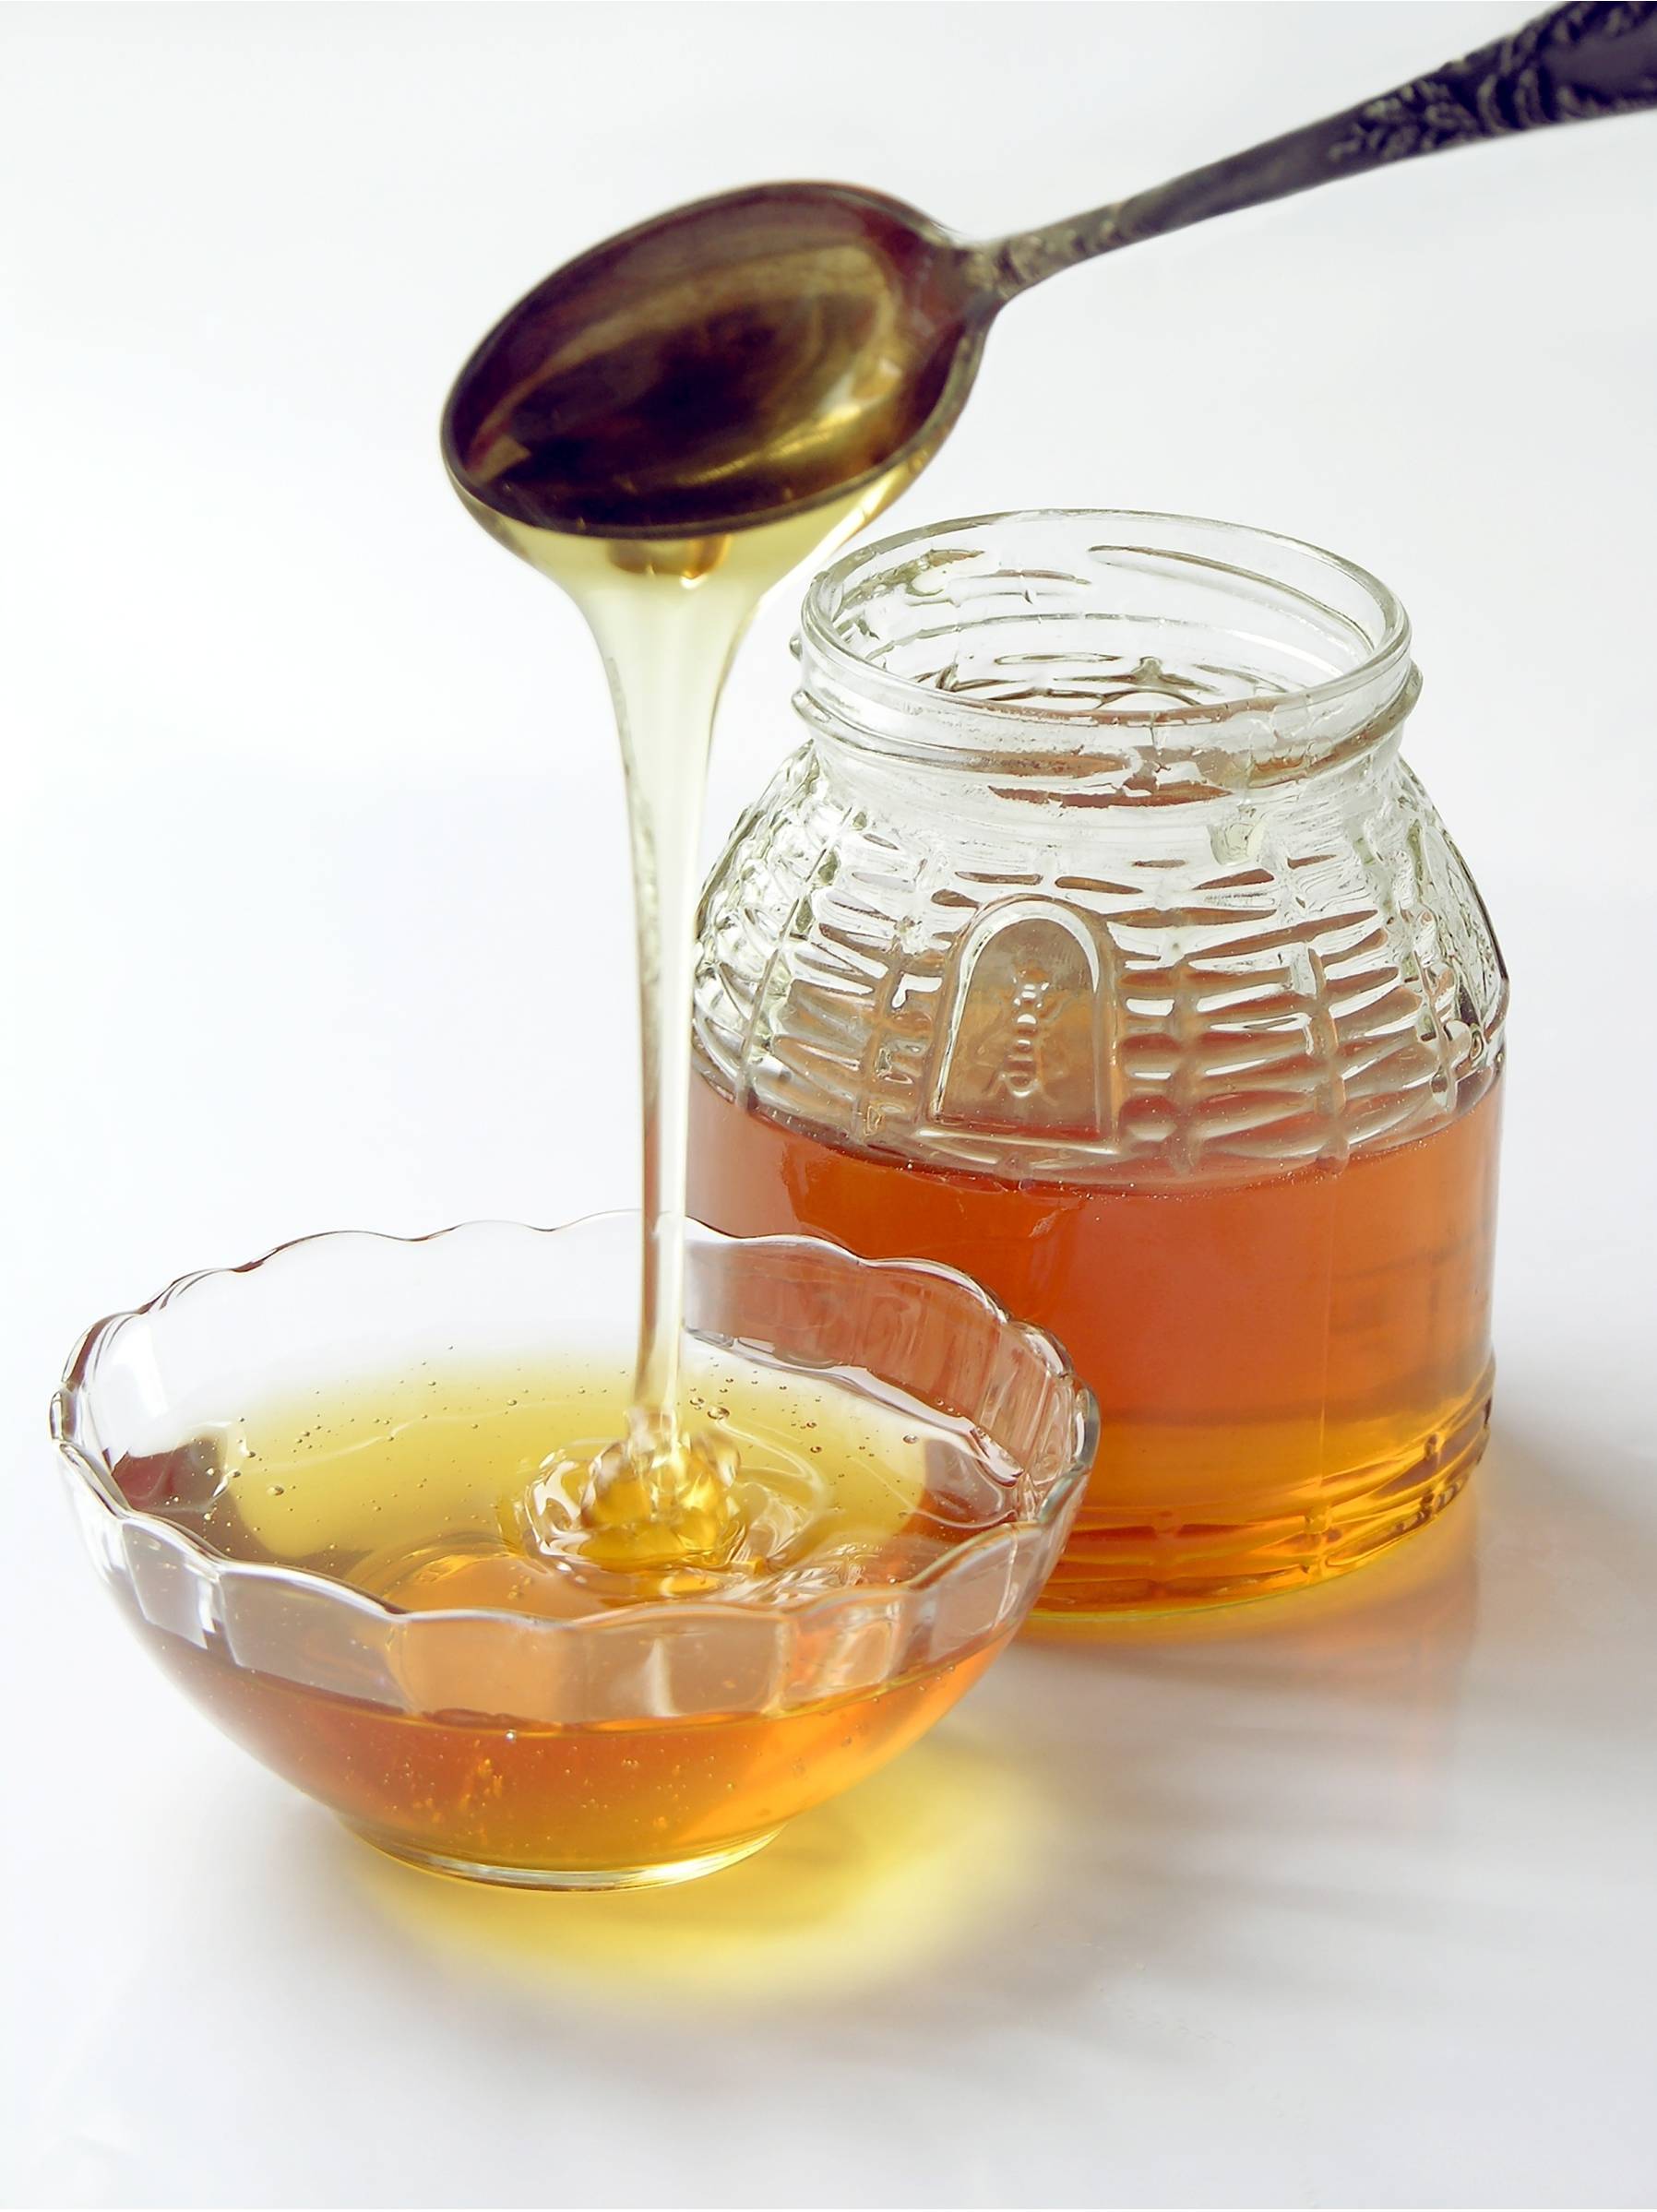 How to Substitute Honey for Sugar